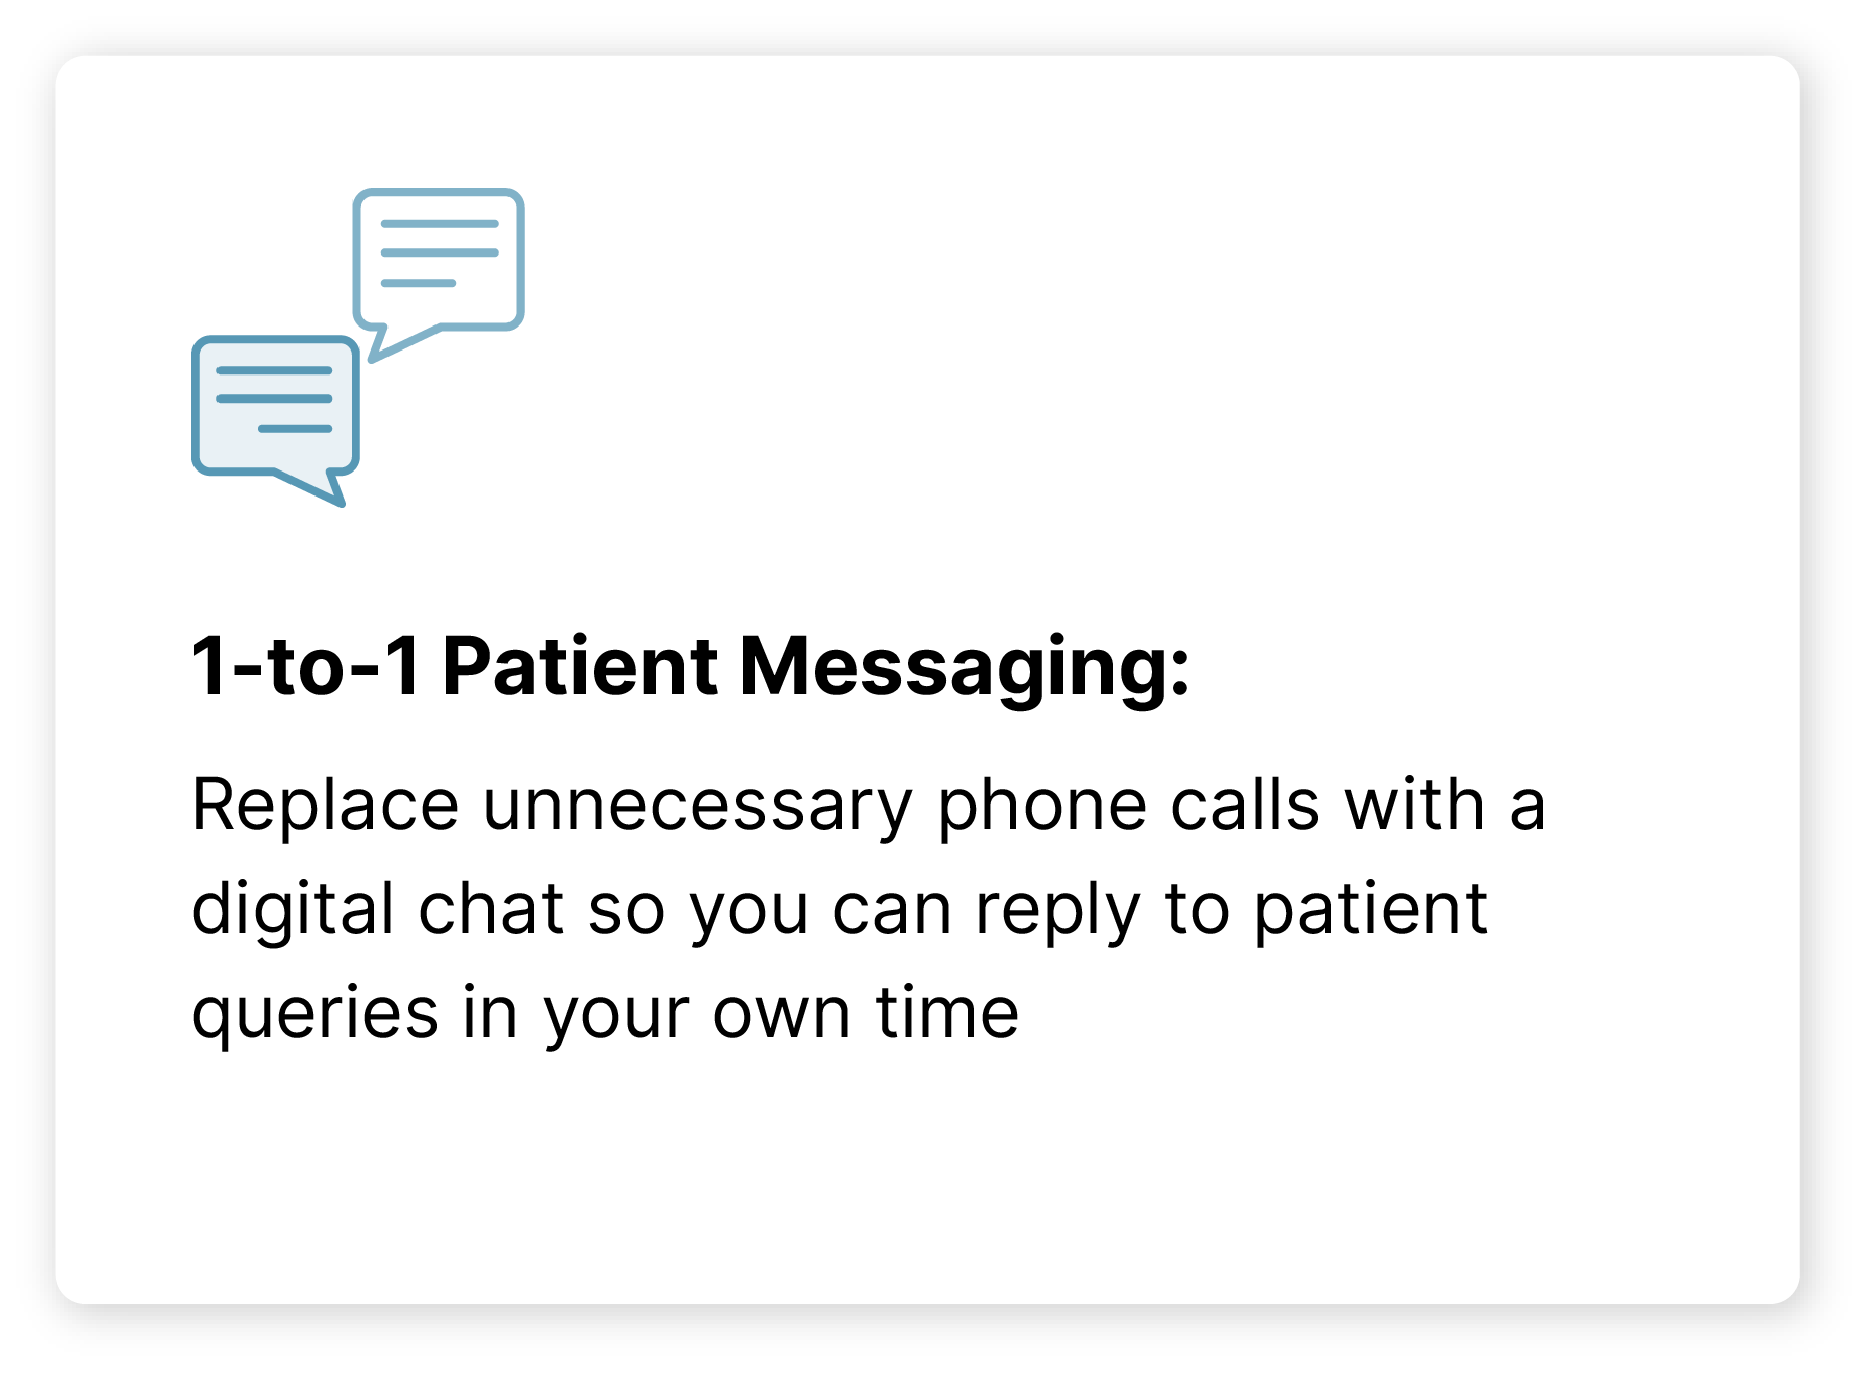 B2B Carousel - 1-to-1 Patient Messaging@4x